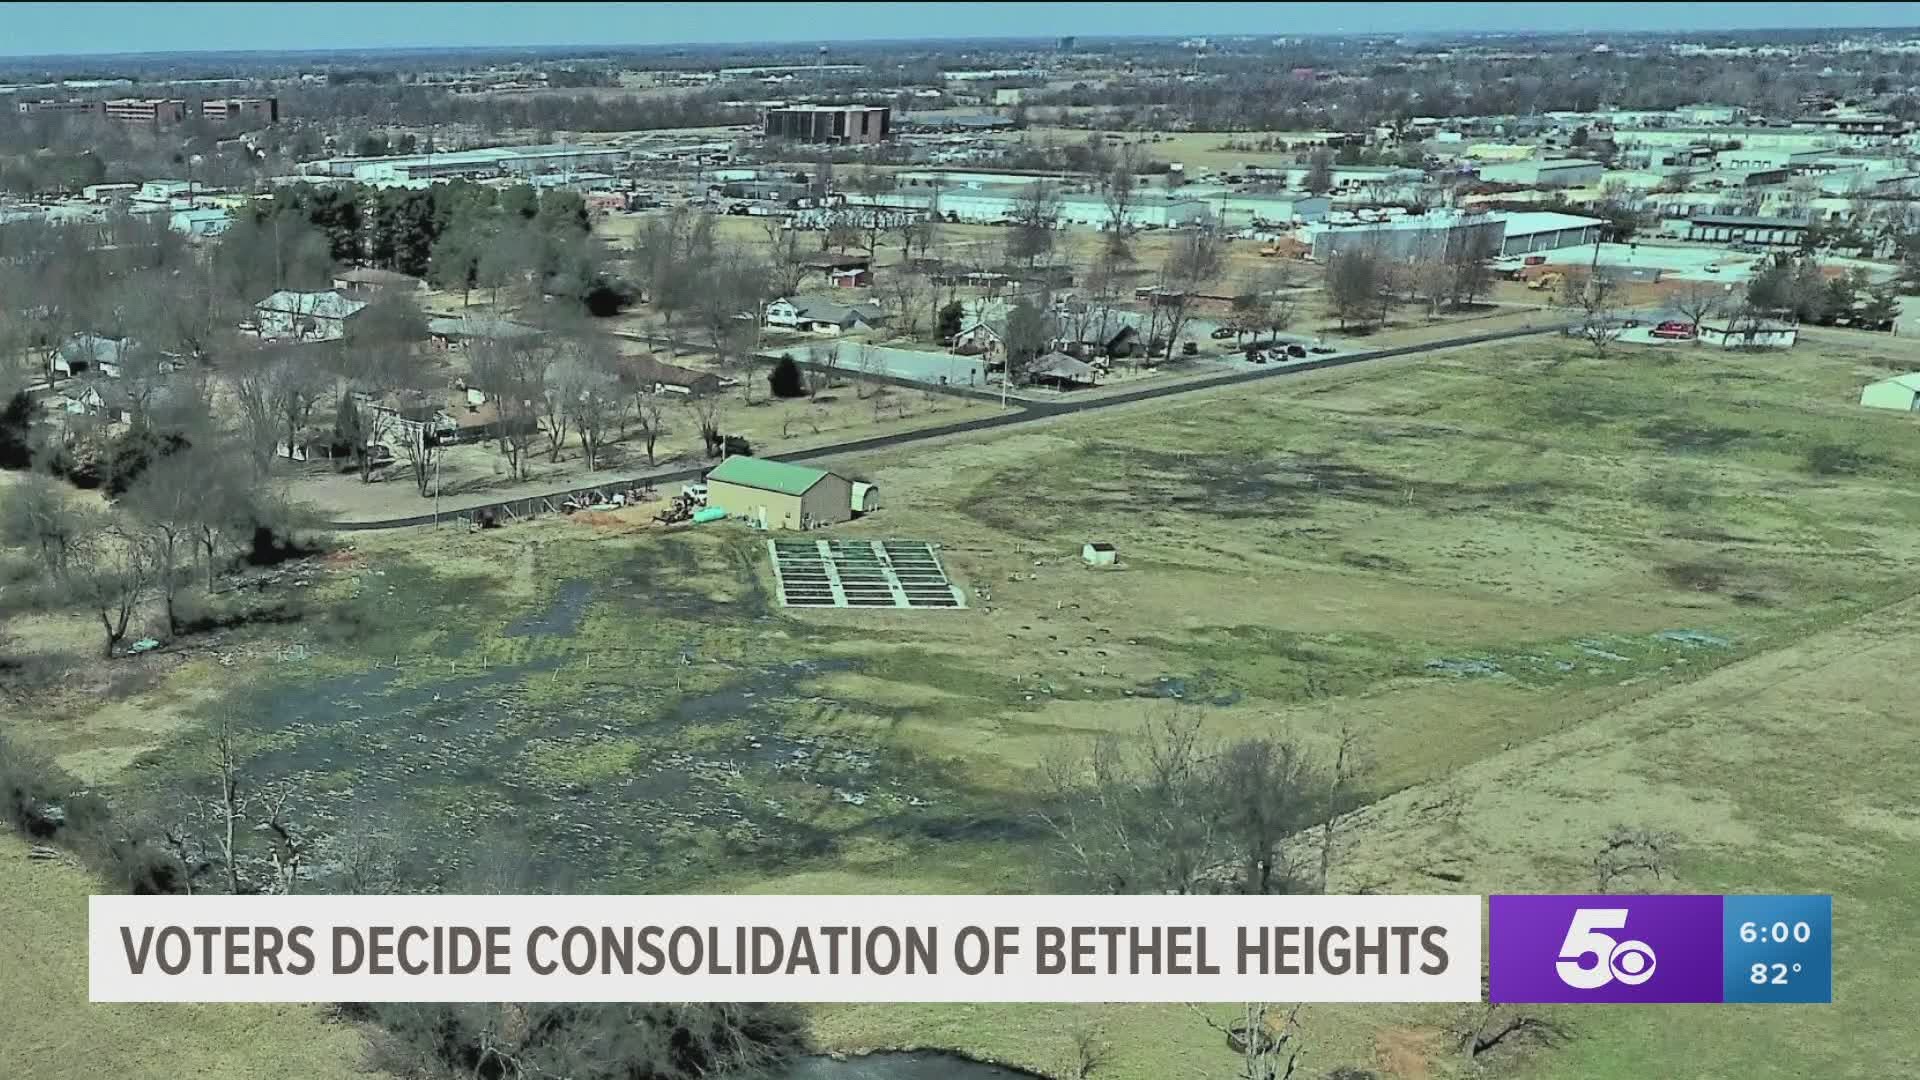 If approved by voters, Bethel Heights could soon be part of Springdale. https://bit.ly/2PtRF7M